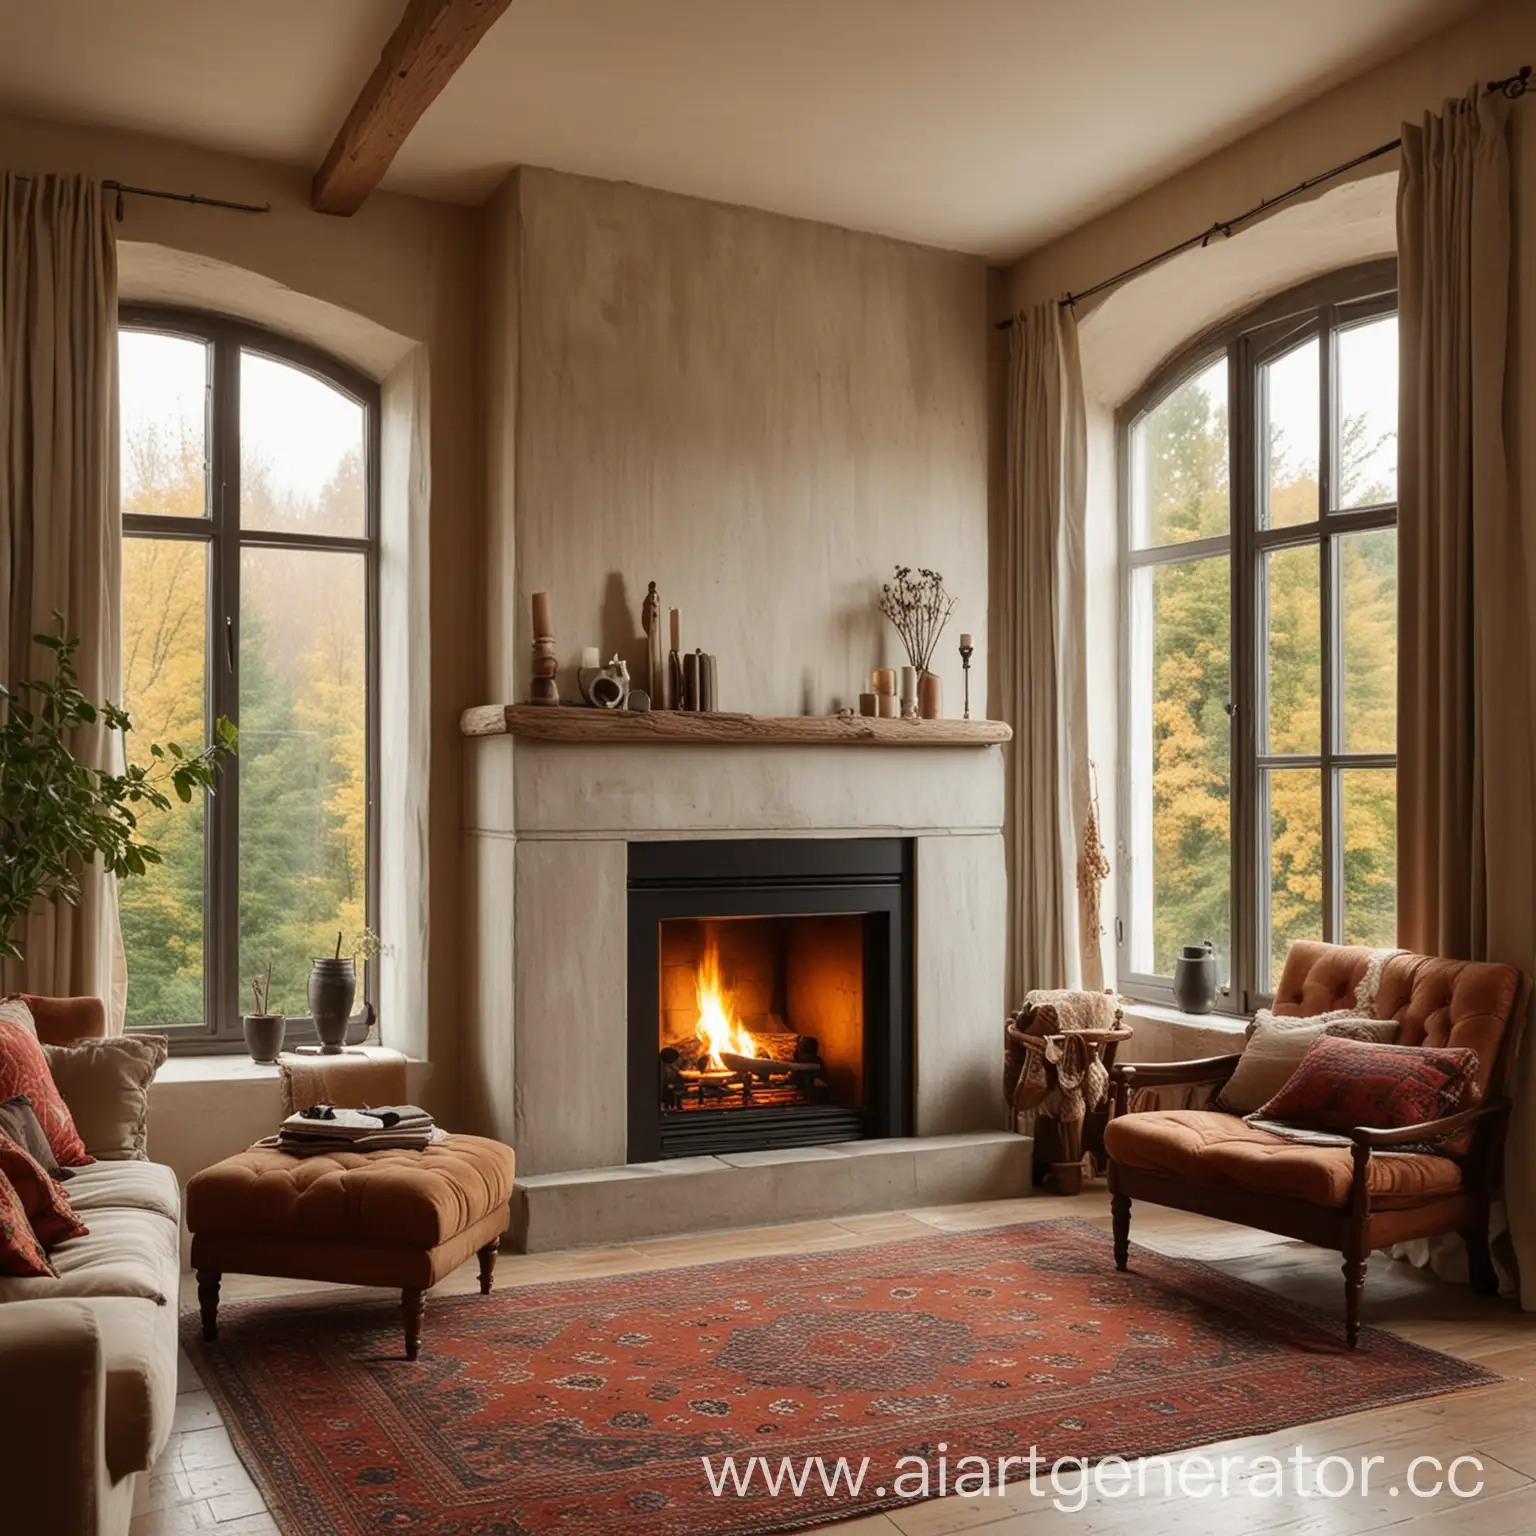 Cozy-Interior-with-Fireplace-and-Large-Windows